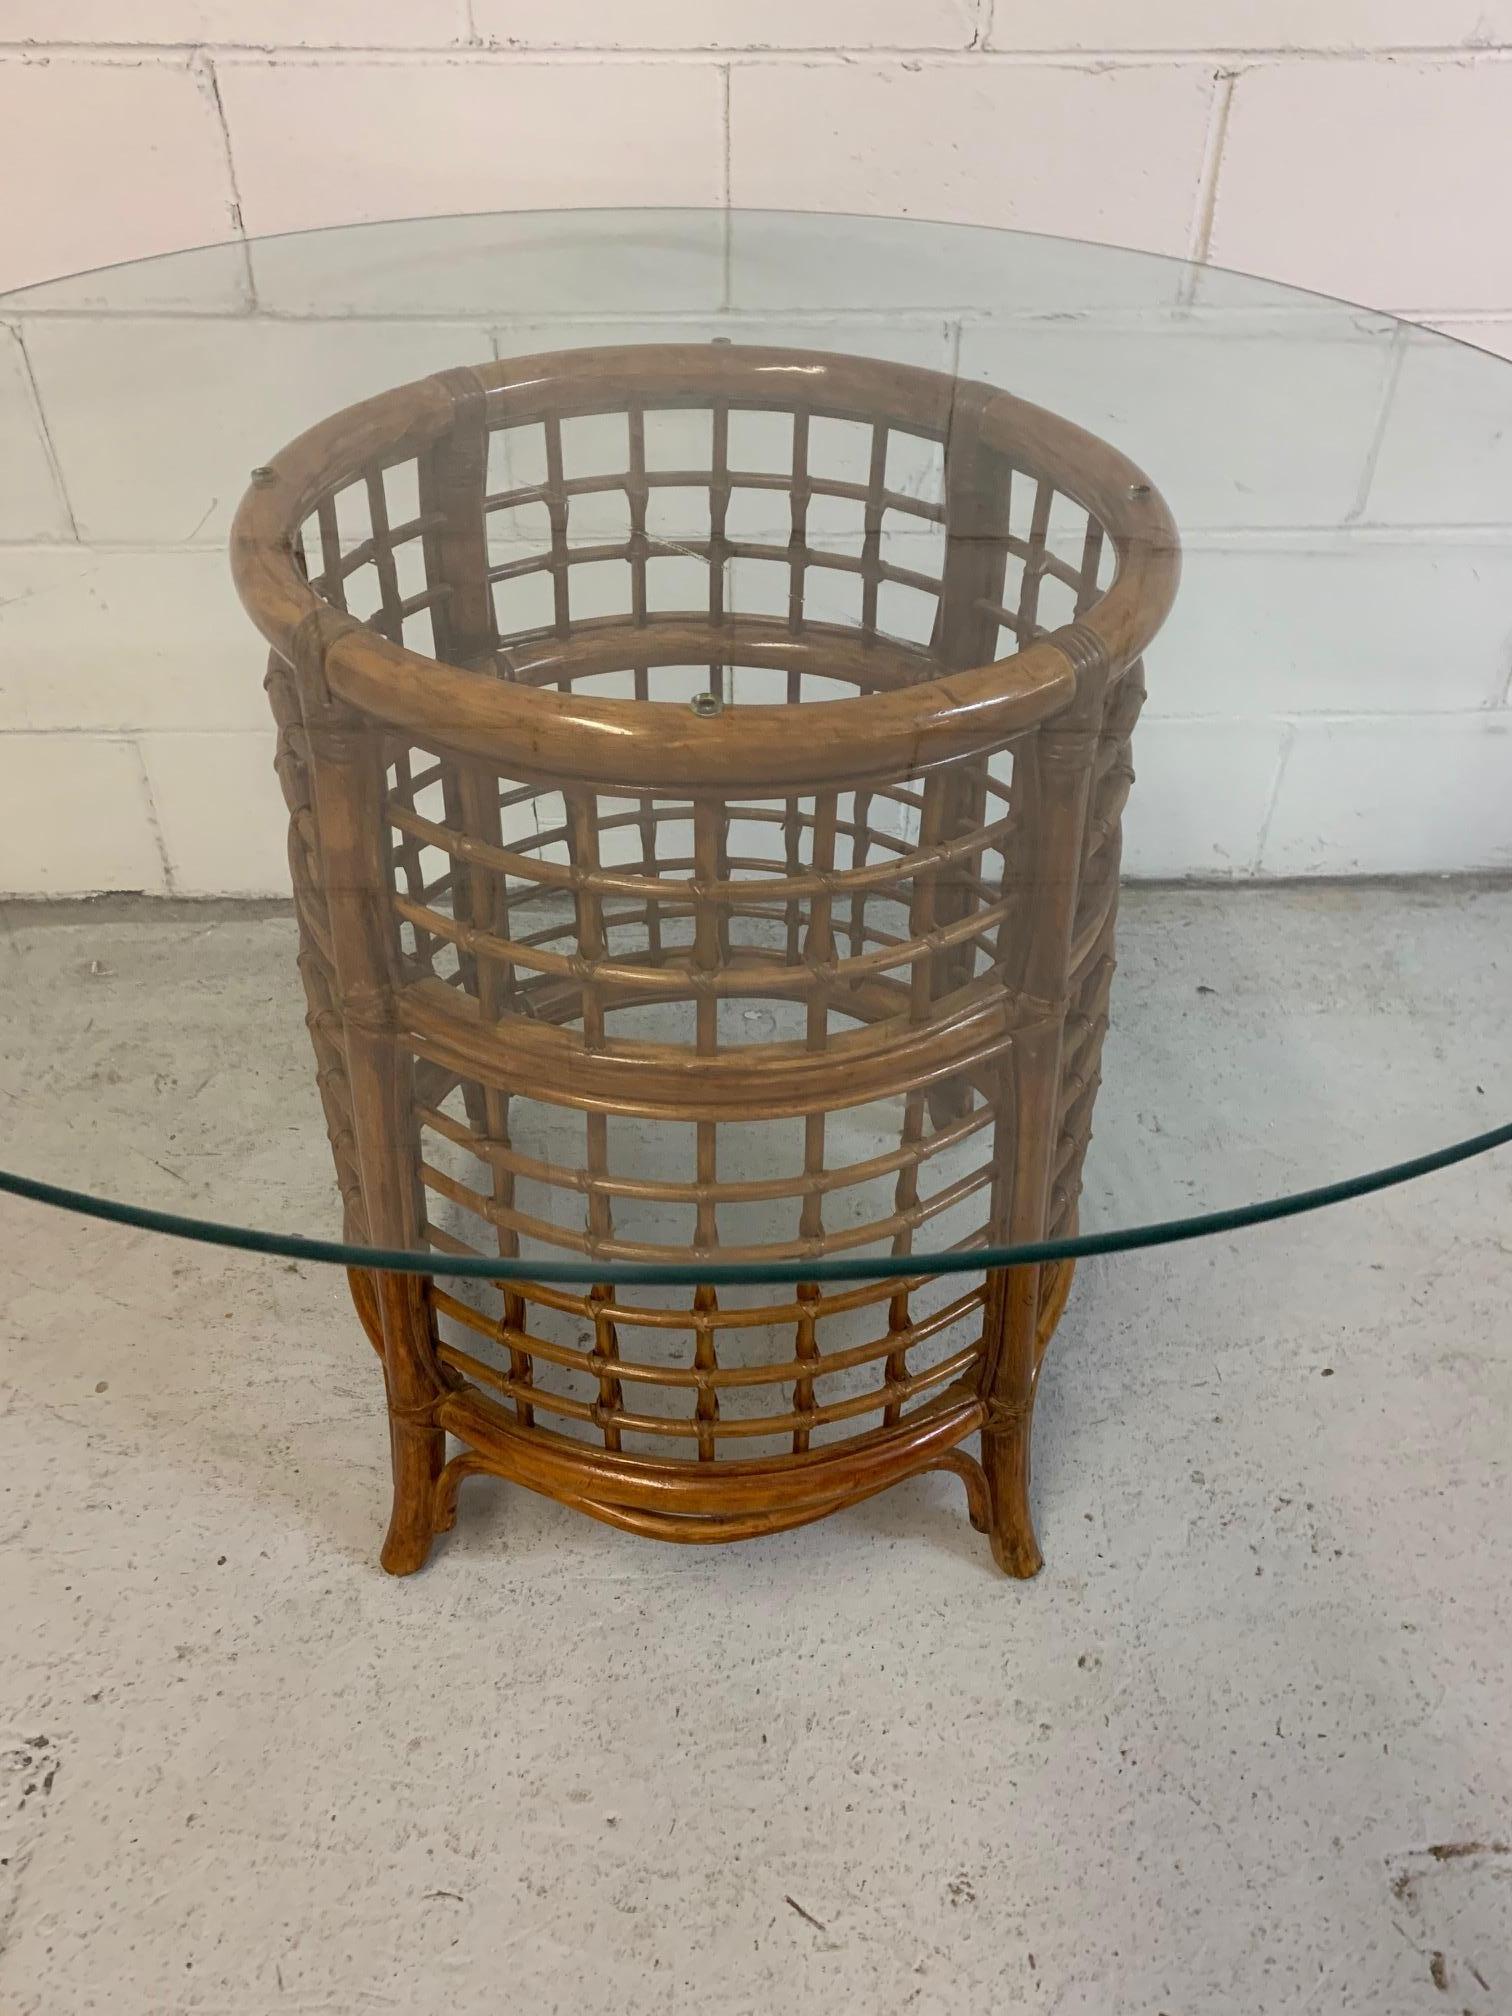 Midcentury rattan dining table features a rich, deep brown finish and a round glass top. Very good vintage condition with minor imperfections consistent with age.
Table measures 44